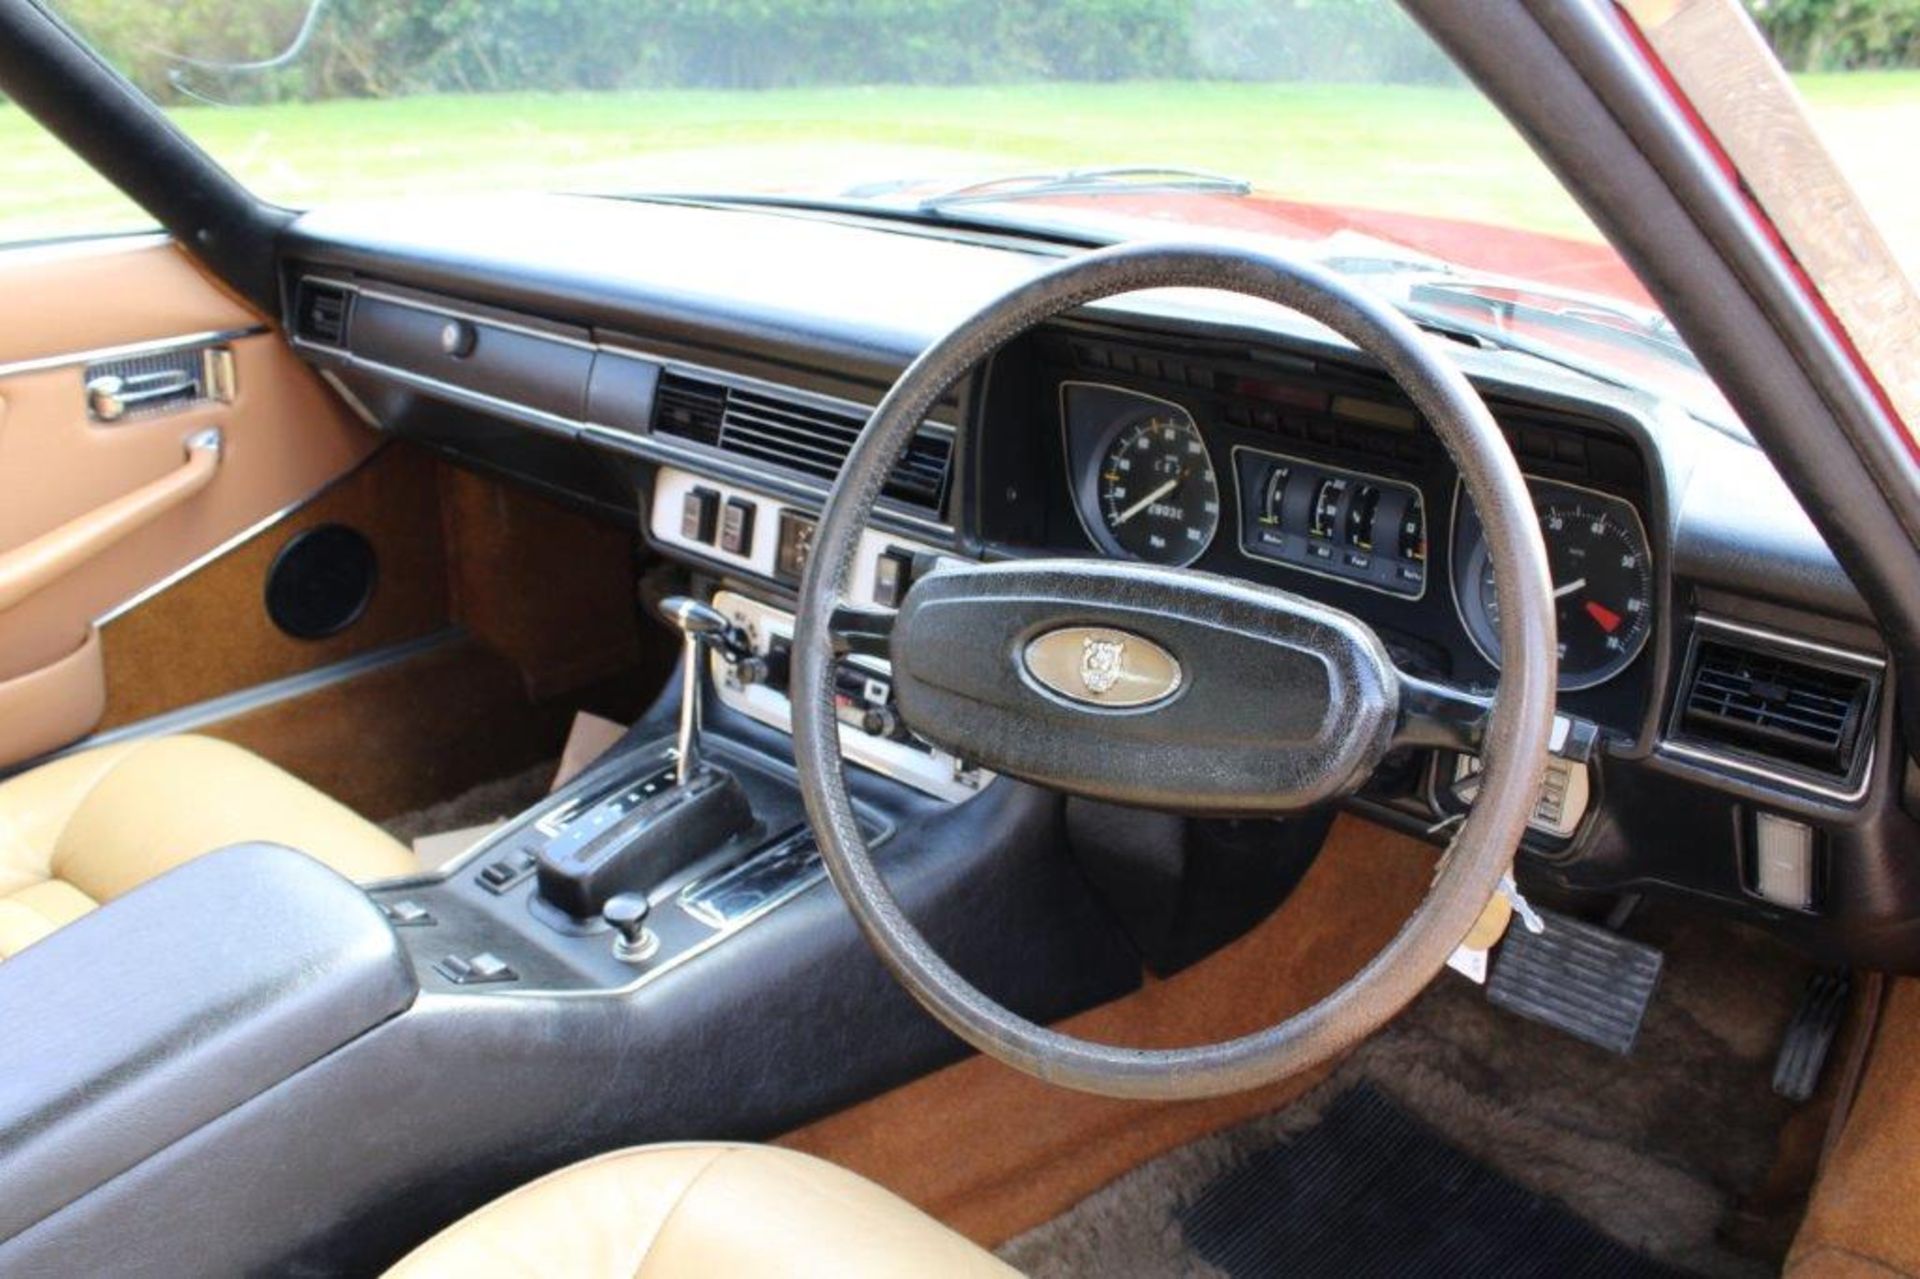 1976 Jaguar XJ-S 5.3 V12 Coupe Auto 29,030 miles from new - Image 13 of 28